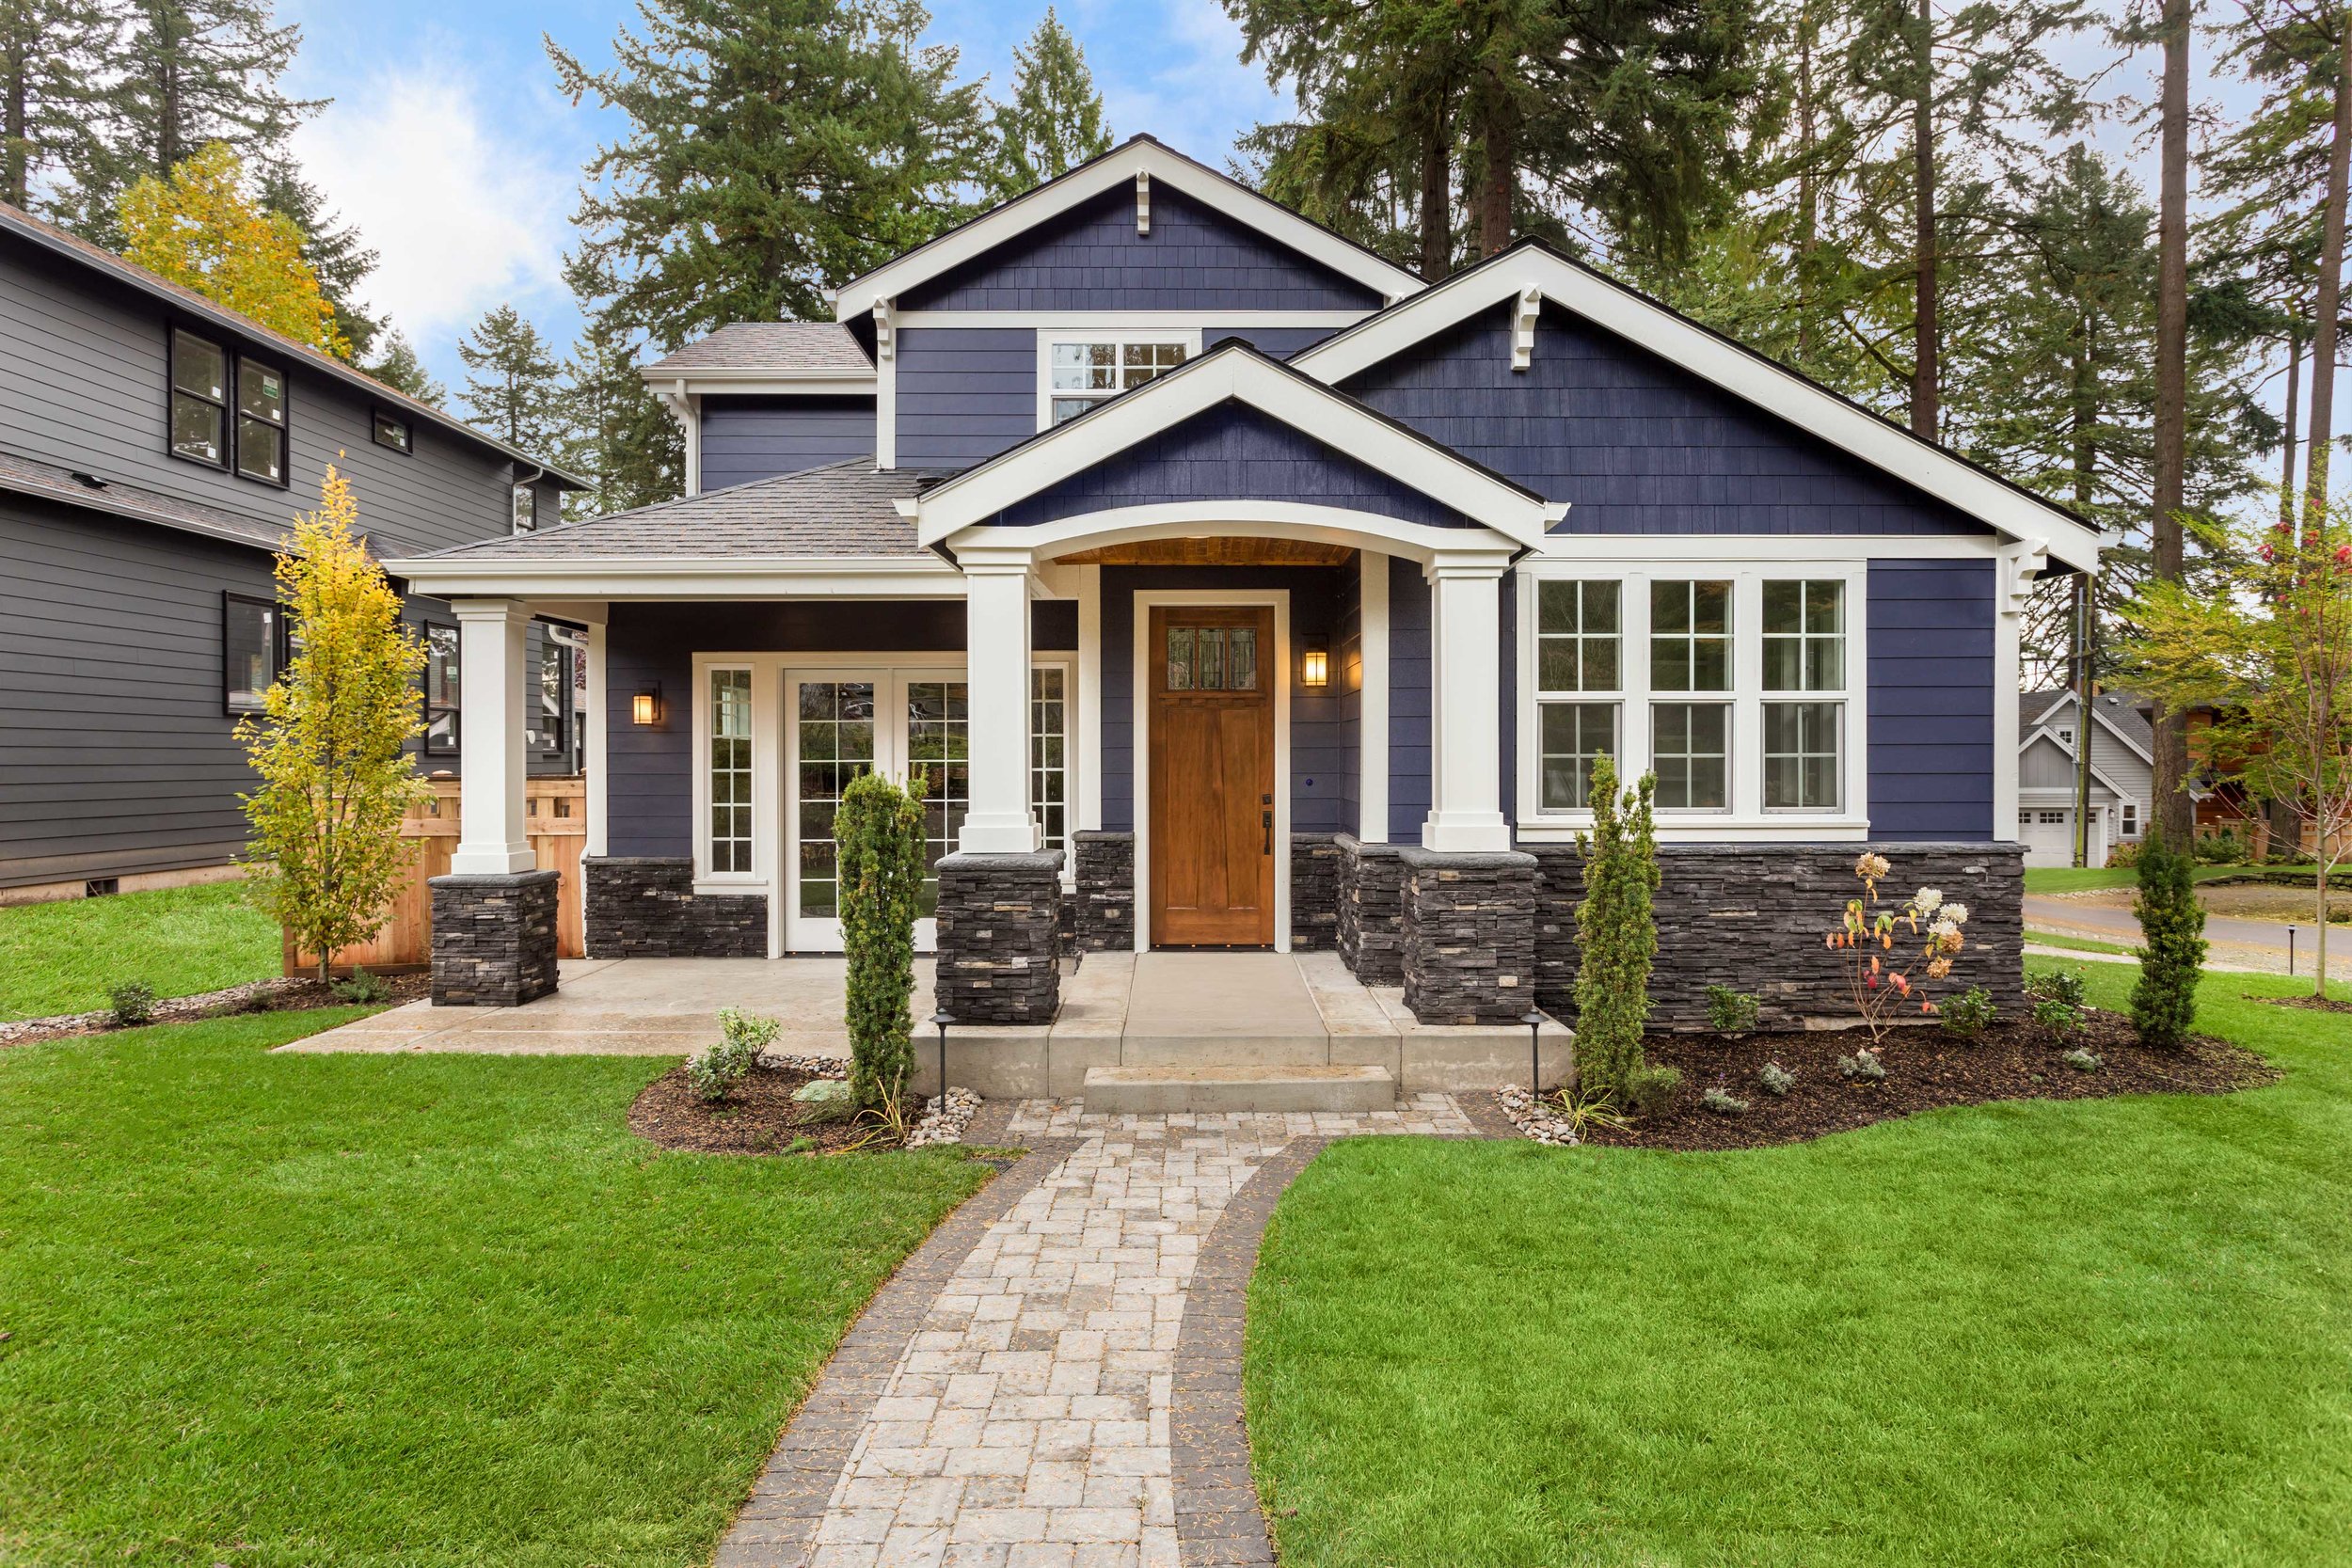 Architectural Style Craftsman-Mission